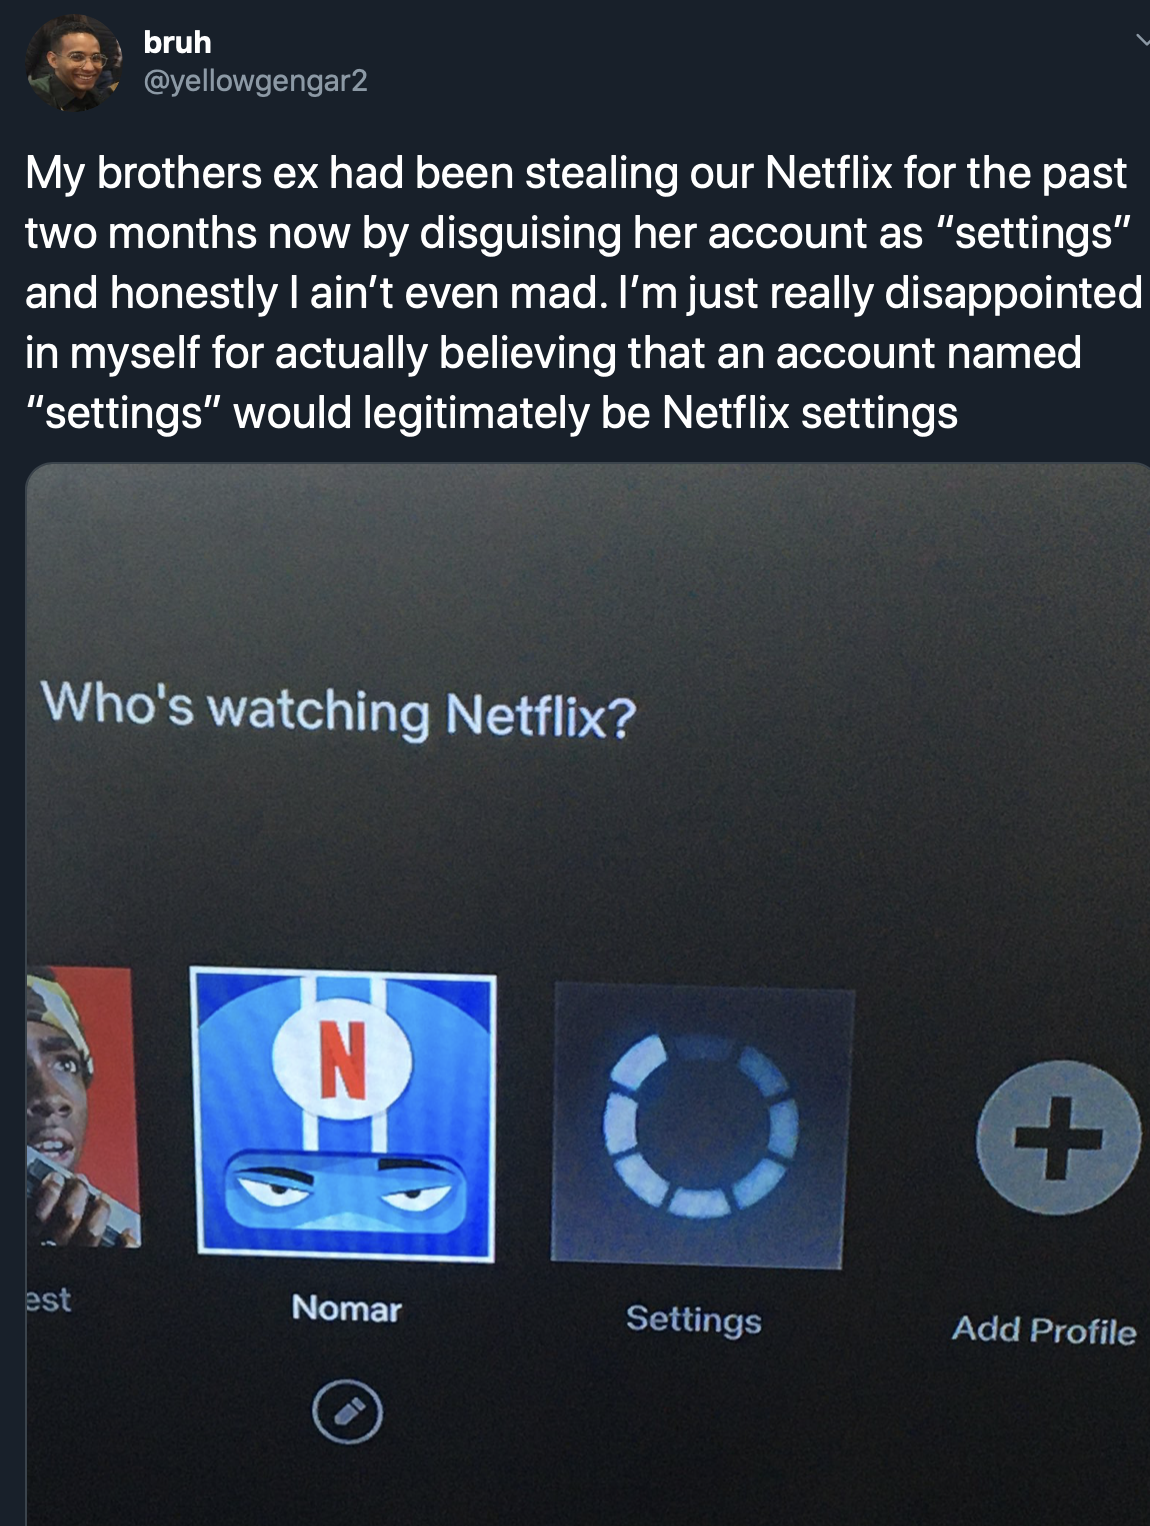 Open the Netflix app
Click on the settings or gear icon